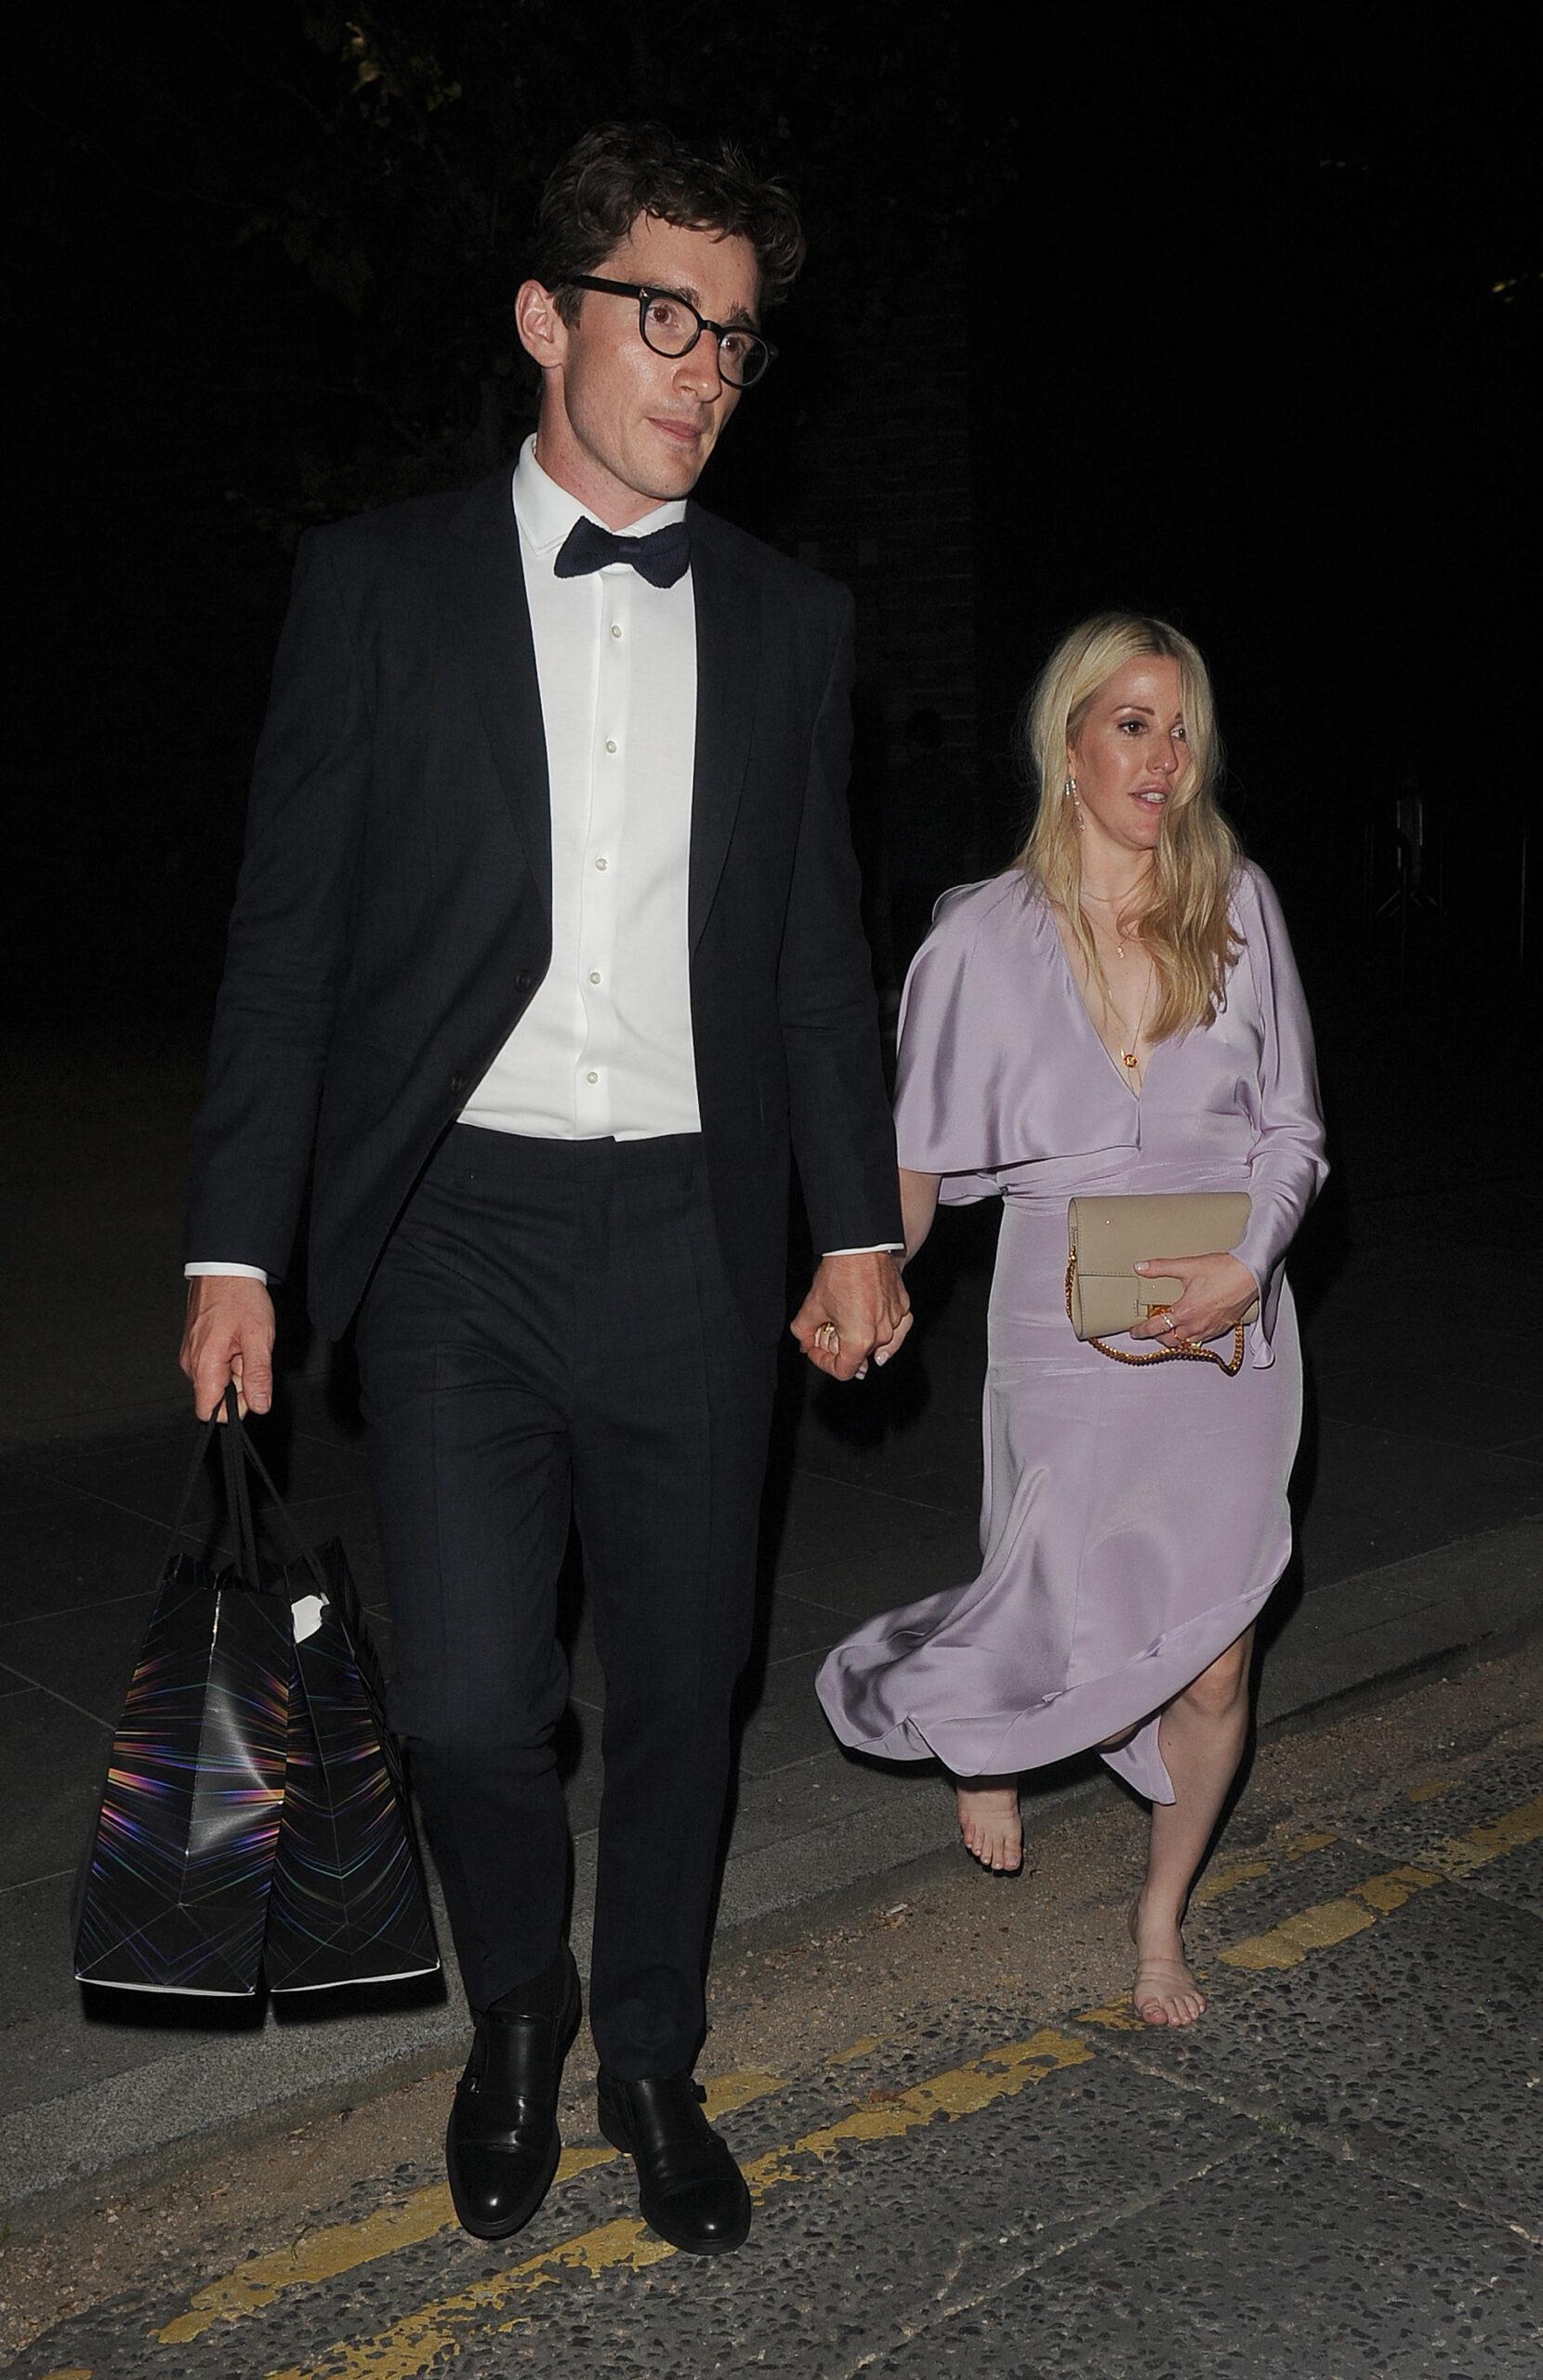 Ellie Goulding is seen walking barefoot, as she and her husband Caspar Jopling leave the GQ Man Of The Years Awards 2021